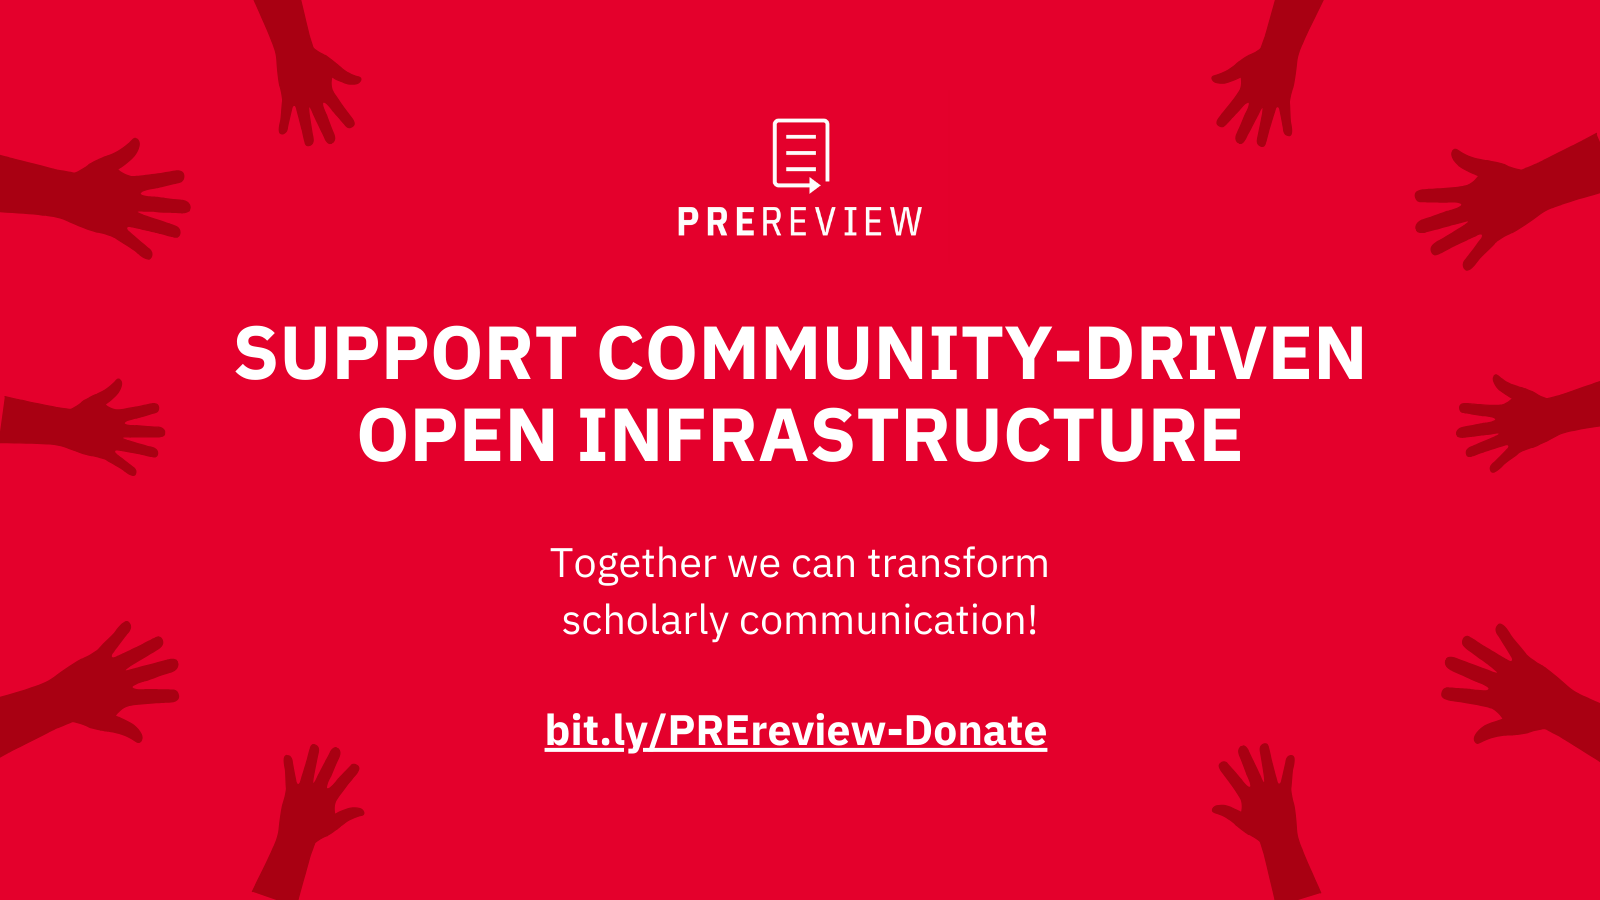 Red banner with darker red hands reaching towards the center from the edge of the card. Text says: Support community-driven open infrastructure. Together we can transform scholarly communication! Link to donate: bit.ly/PREreview-Donate